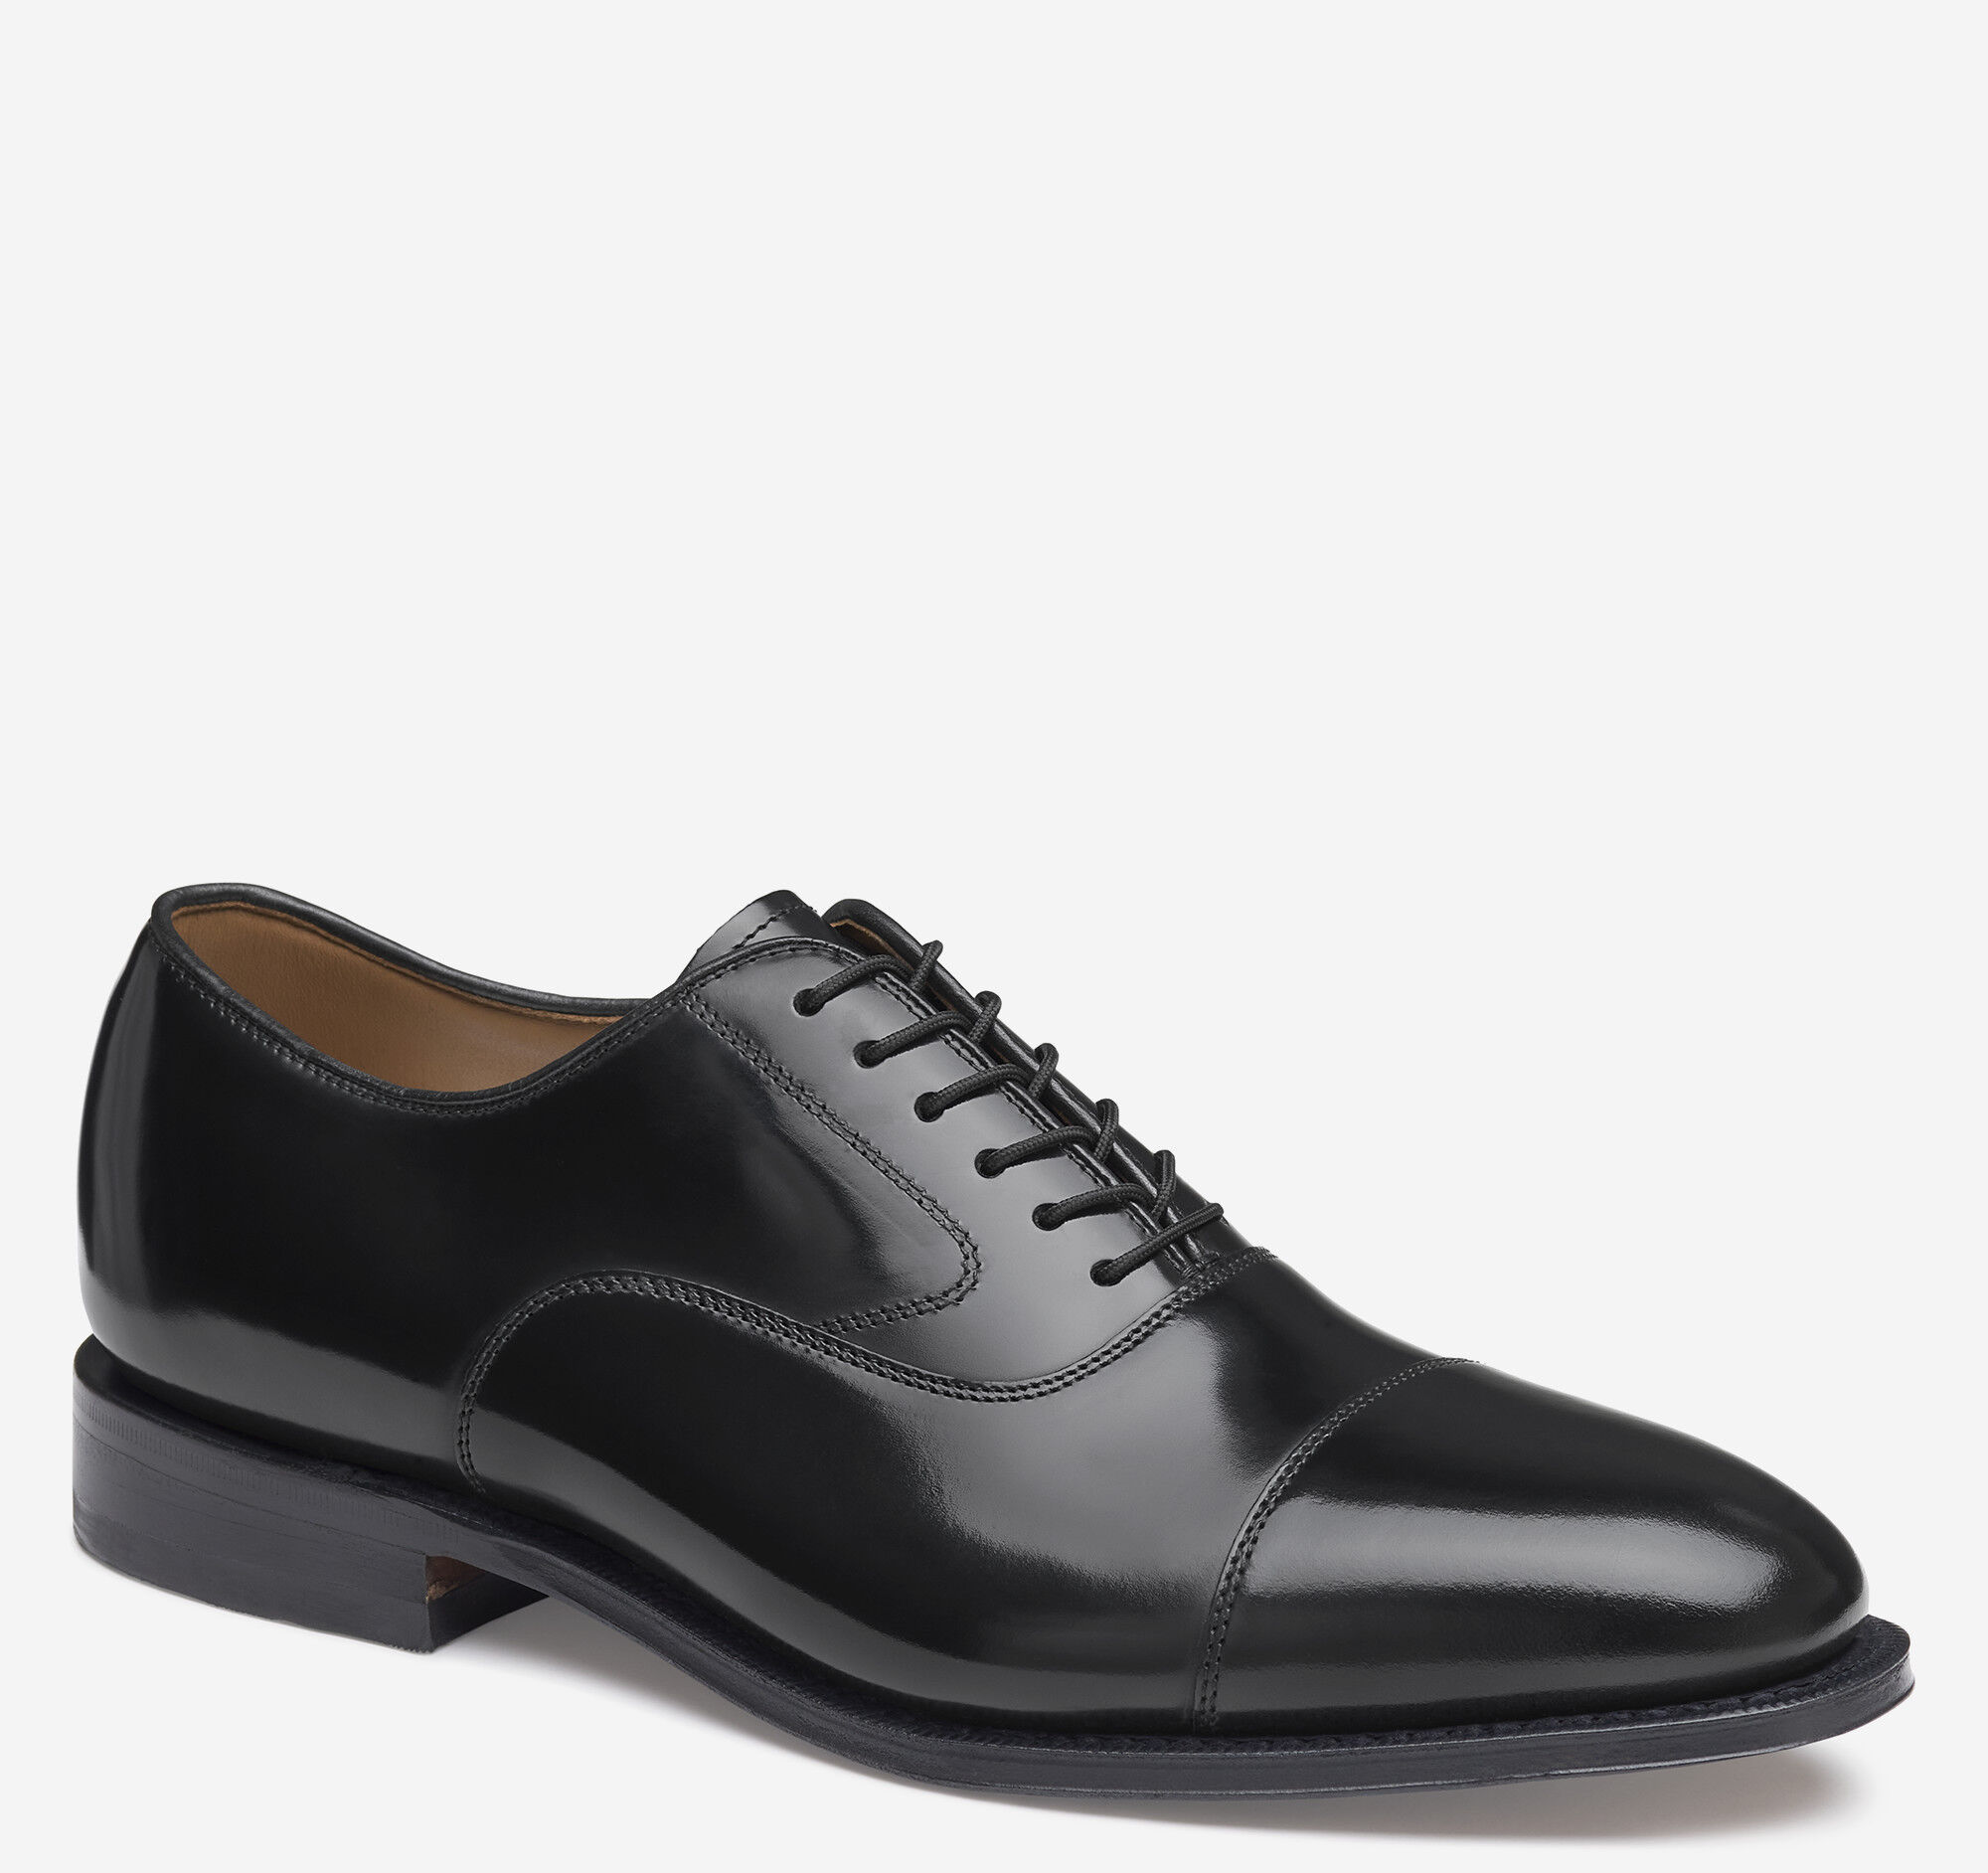 johnston and murphy mens dress shoes